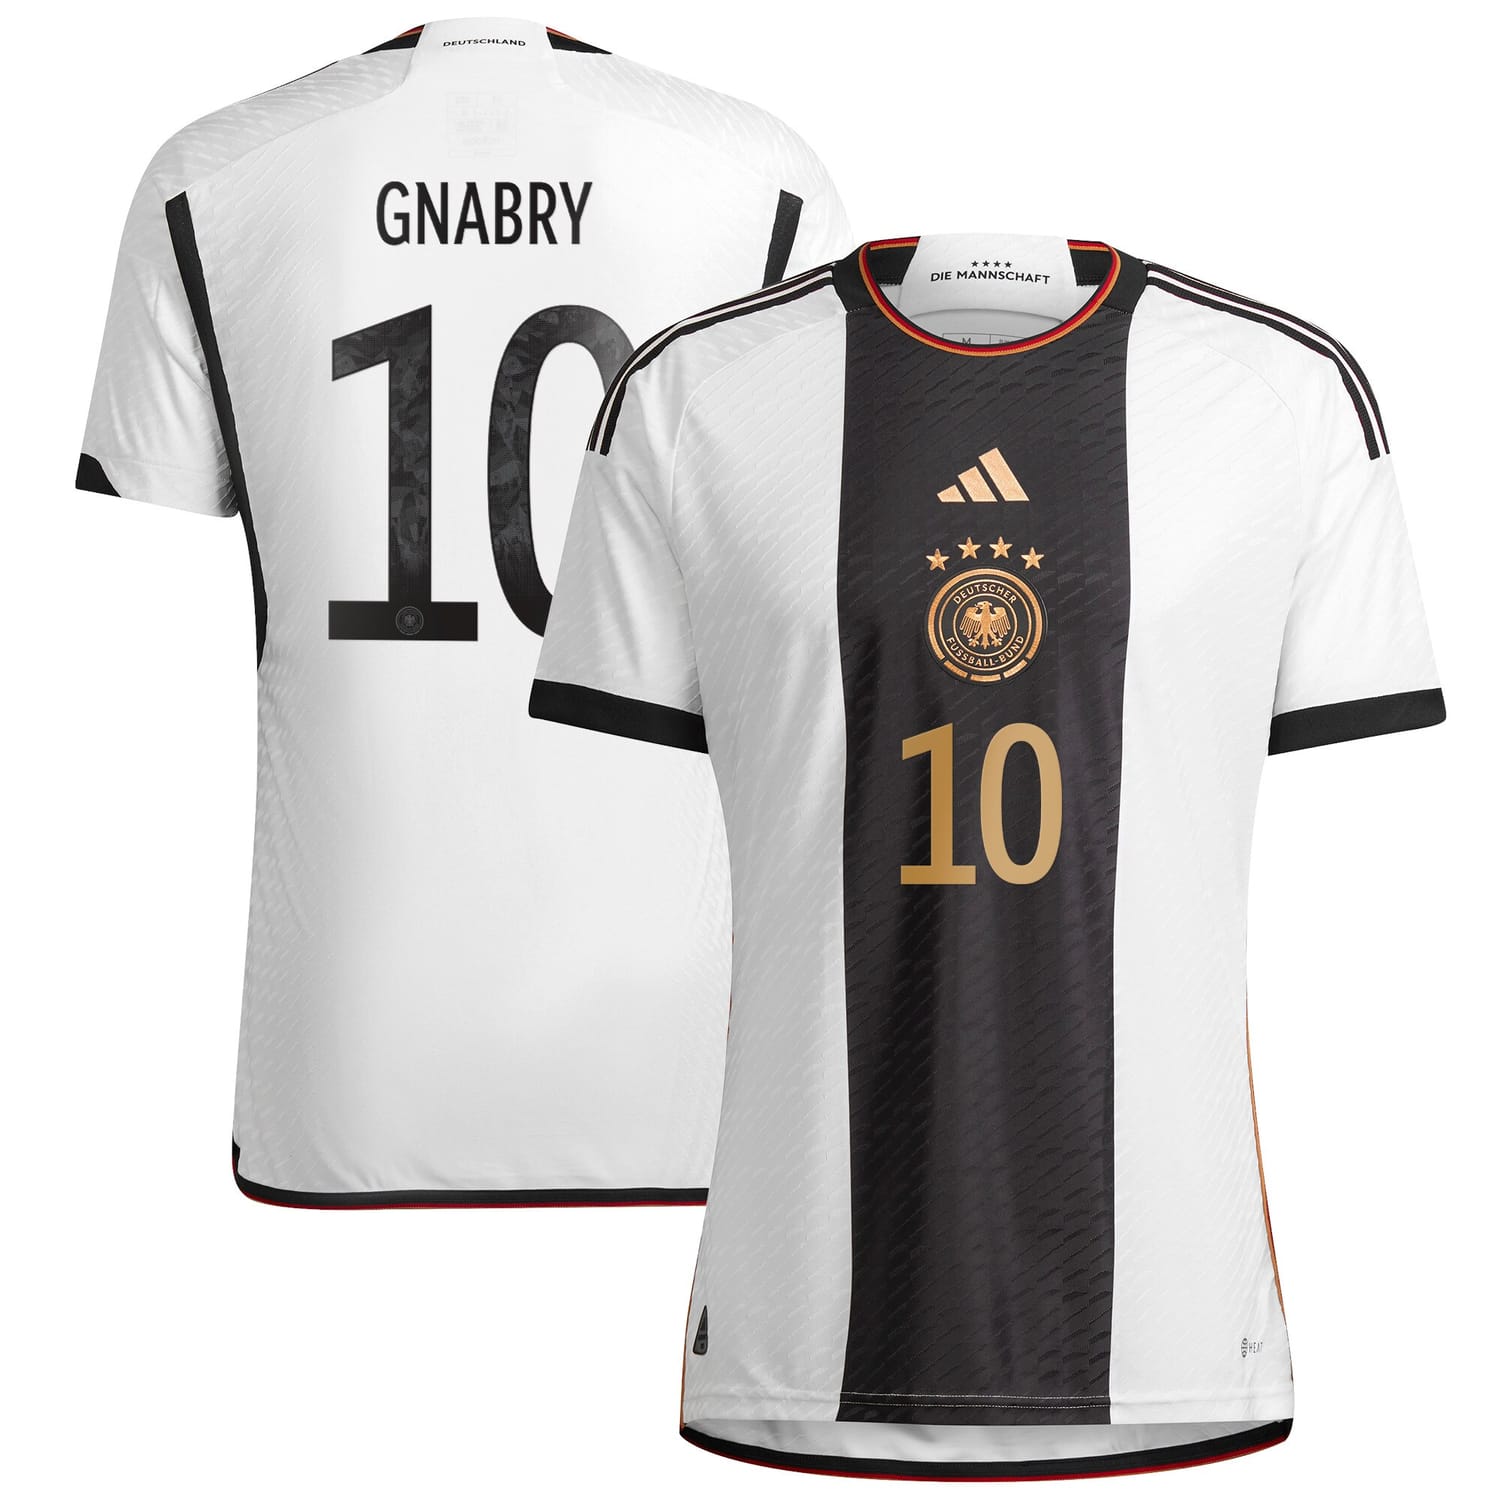 Germany National Team Home Authentic Jersey Shirt player Serge Gnabry 10 printing for Men